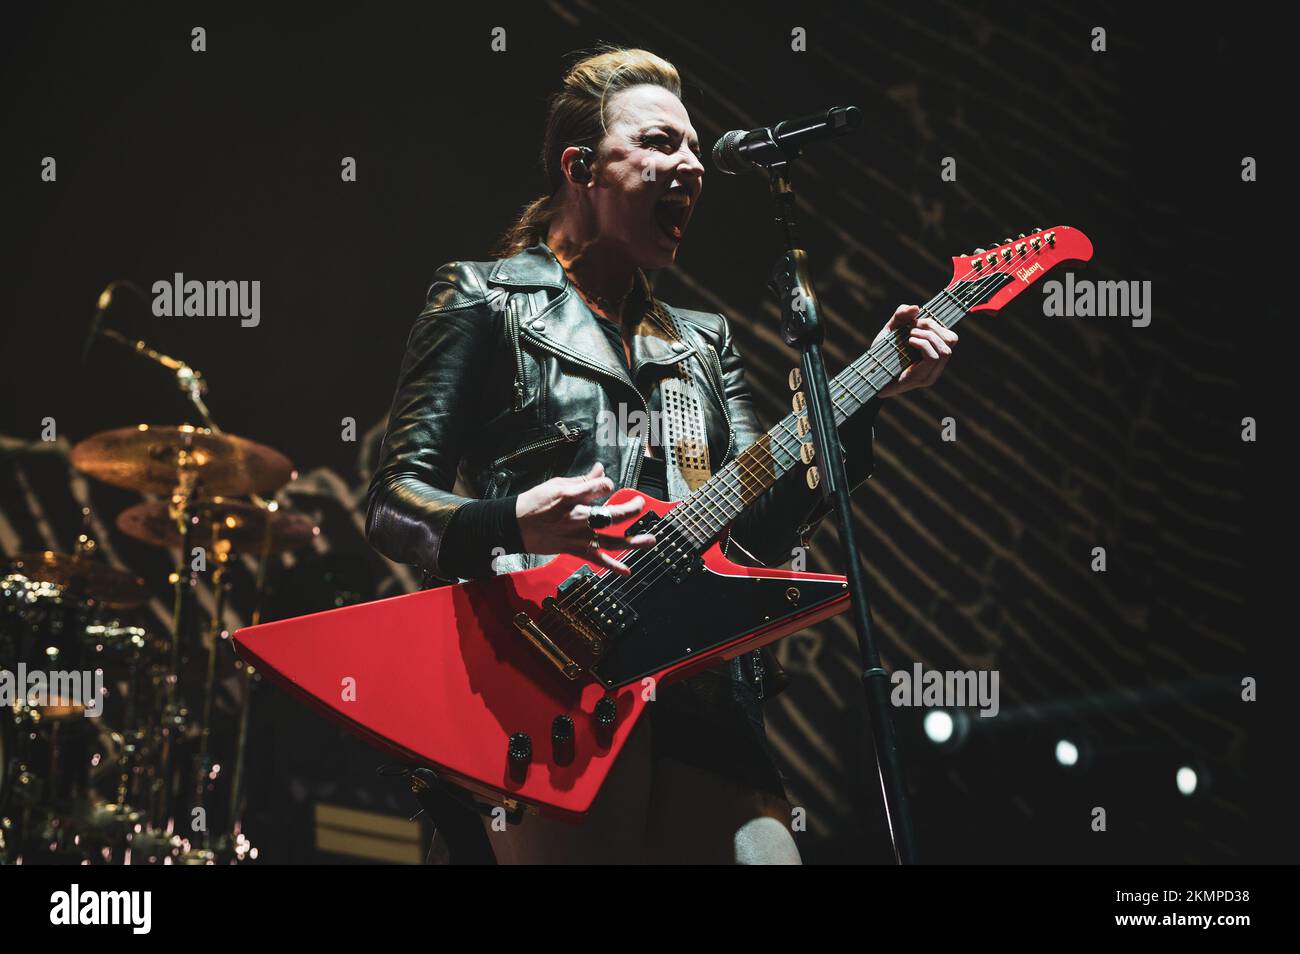 ITALY, MILAN, NOVEMBER 25TH 2022: The American musician, singer and composer Lzzy Hale, founder and leader of the rock band Halestorm, performing live on stage in Milan, opening for the Alter Bridge “Pawns & Kings” European tour. Stock Photo